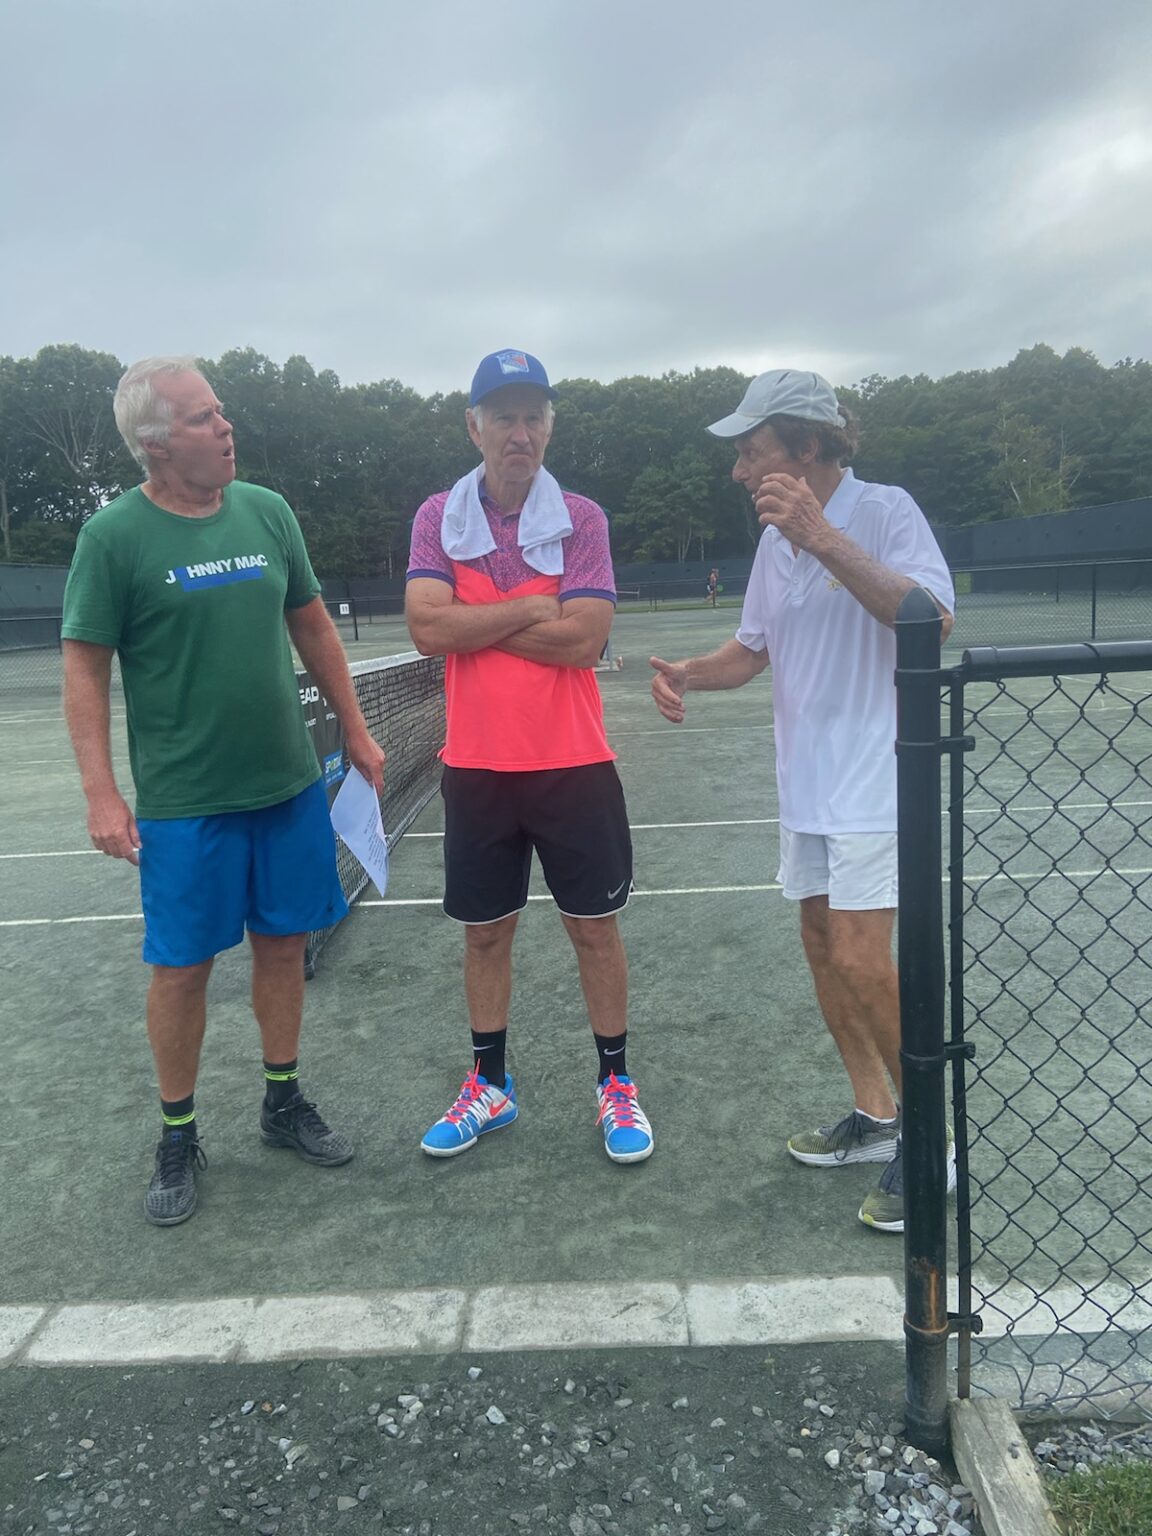 In the midst of a Pro Am tennis event, Marshall Hubsher offers strategic insights to John and Patrick McEnroe, with a focus on the nuanced art of the drop shot.